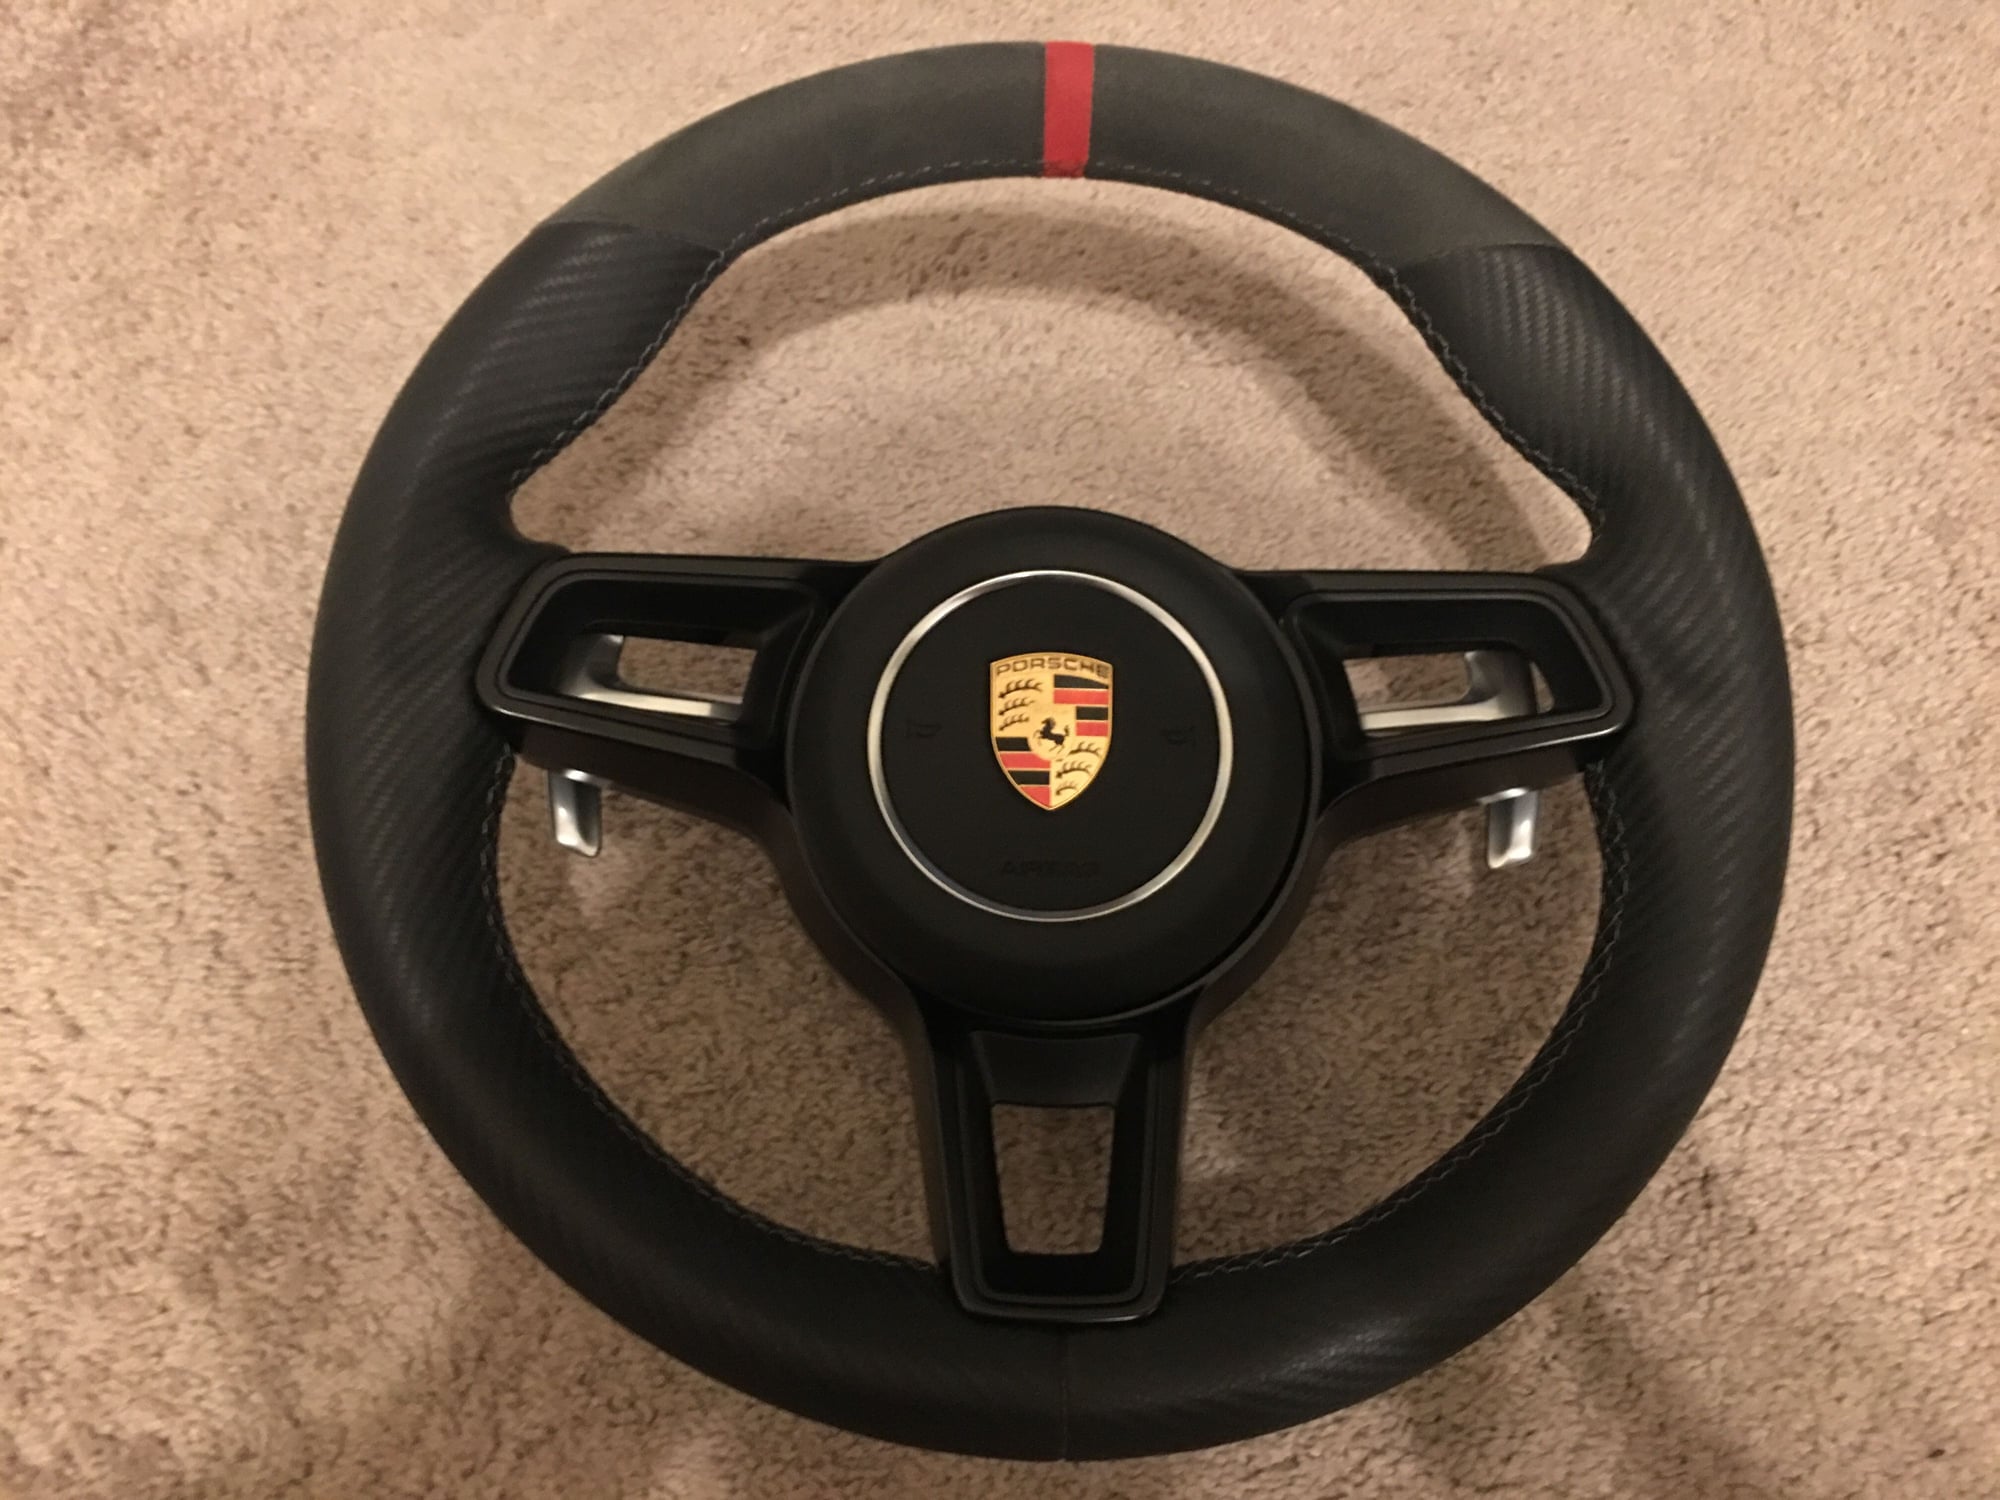 Interior/Upholstery - Alcantara/Carbon 991.2 Steering wheel upgrade (W/ Airbag) PDK - New - 2005 to 2019 Porsche 911 - Spring, TX 77386, United States